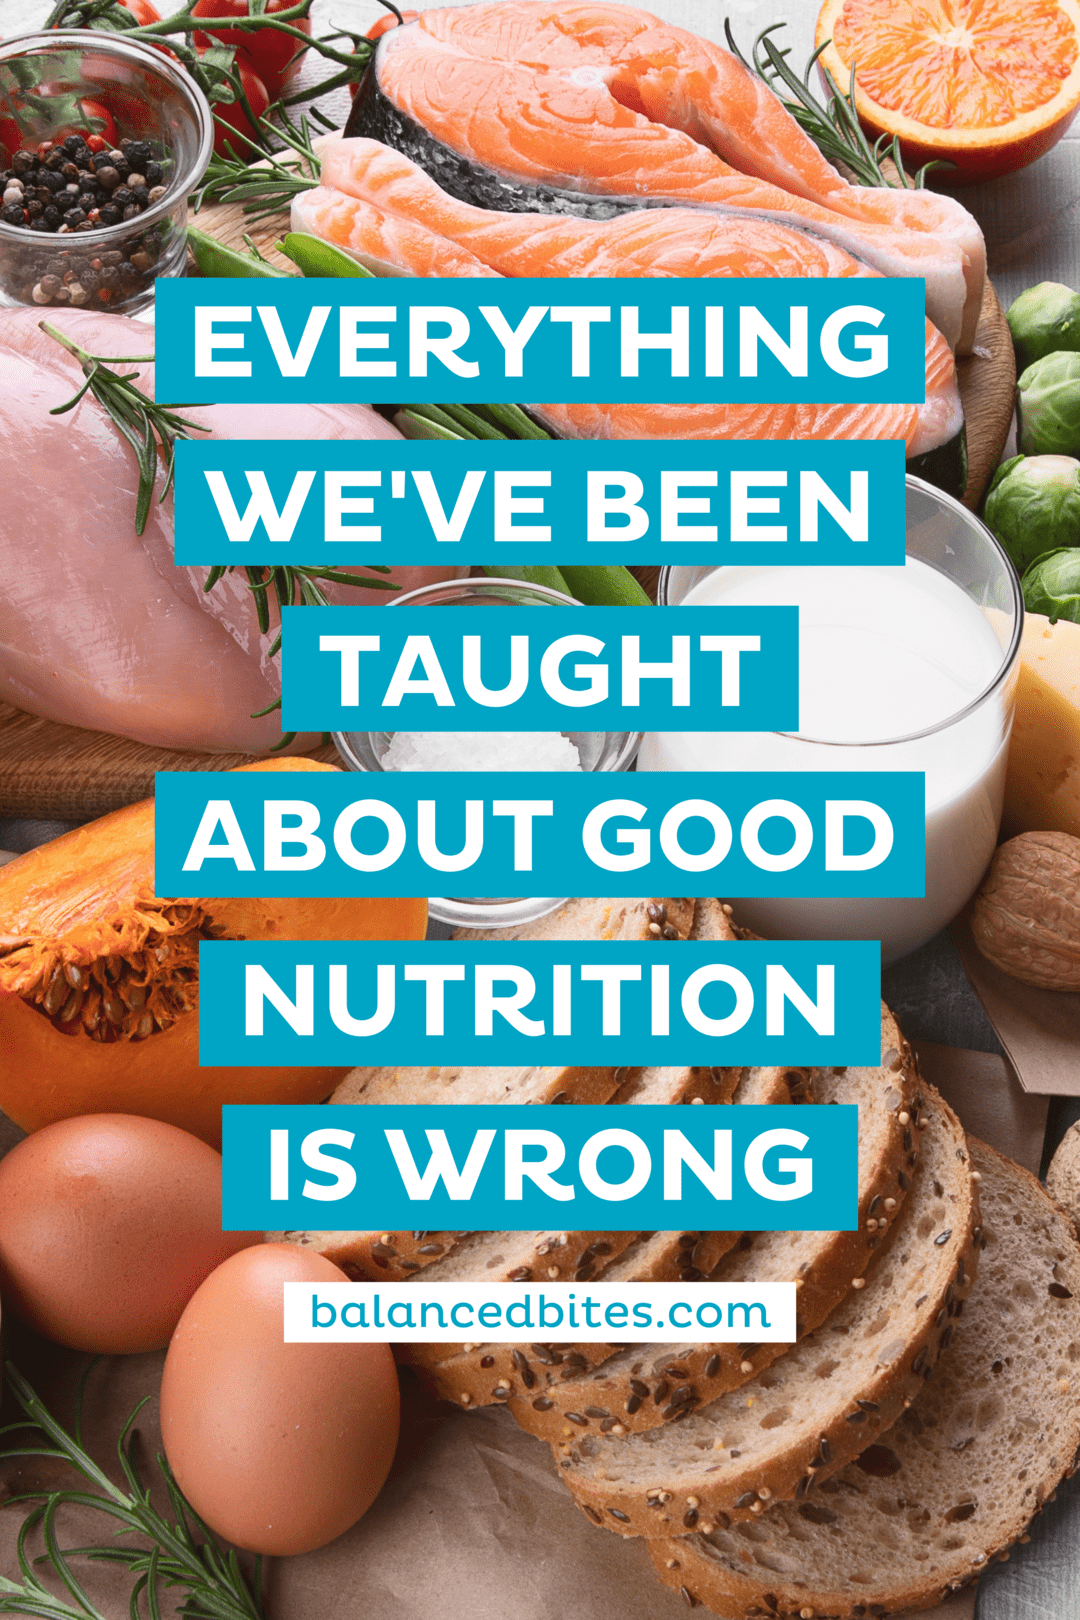 Everything We've Been Taught About Good Nutrition Is Wrong | Balanced Bites